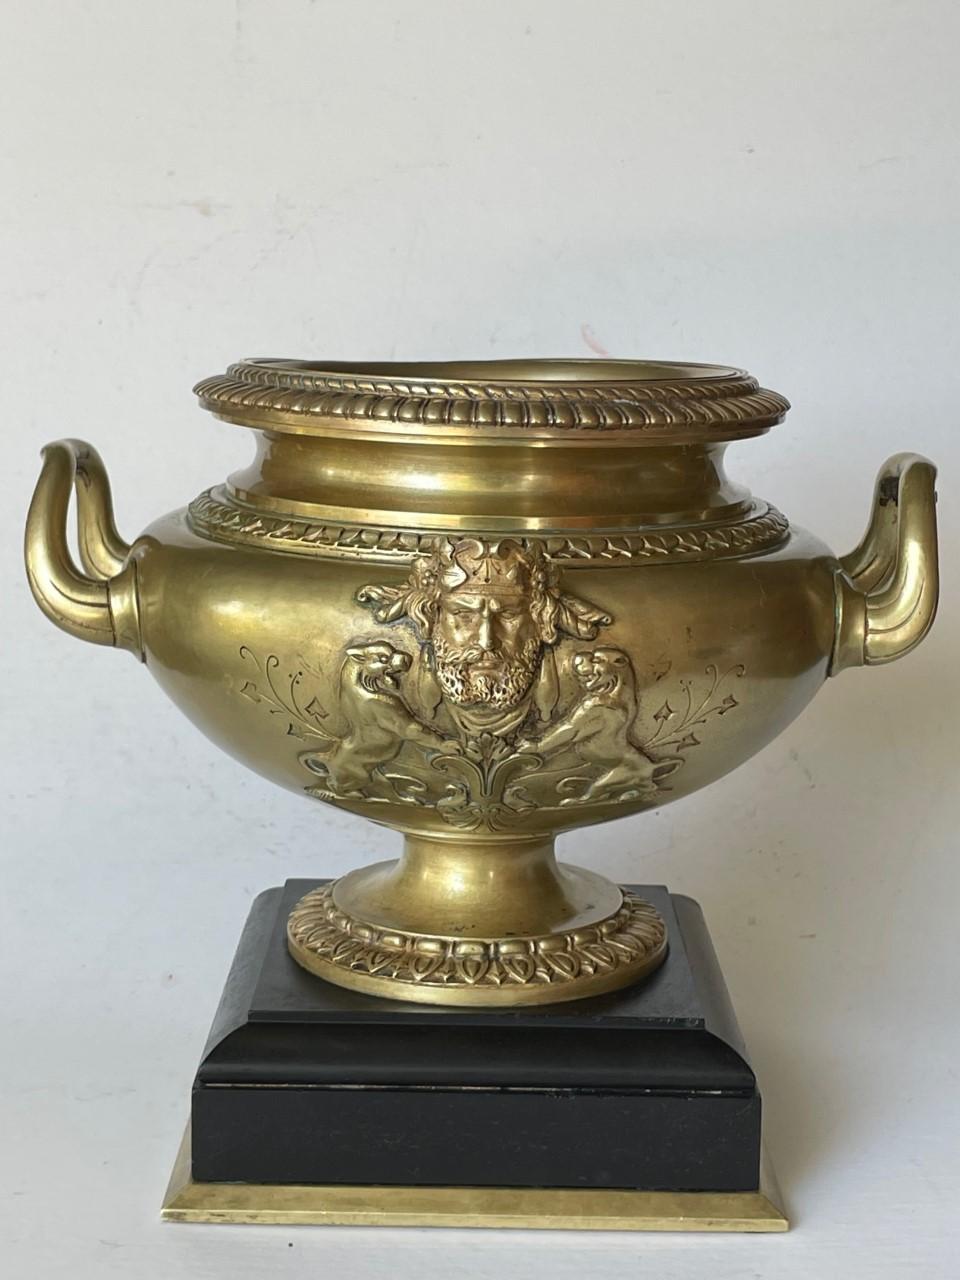 French Large 19th Century Patinated Bronze centerpiece Urn on Marble Base.

Stunning French 19th century Napoleon III period bronze urn raised on a black marble base. The centerpiece urn has a molded rim on the top. Front and back are decorated with